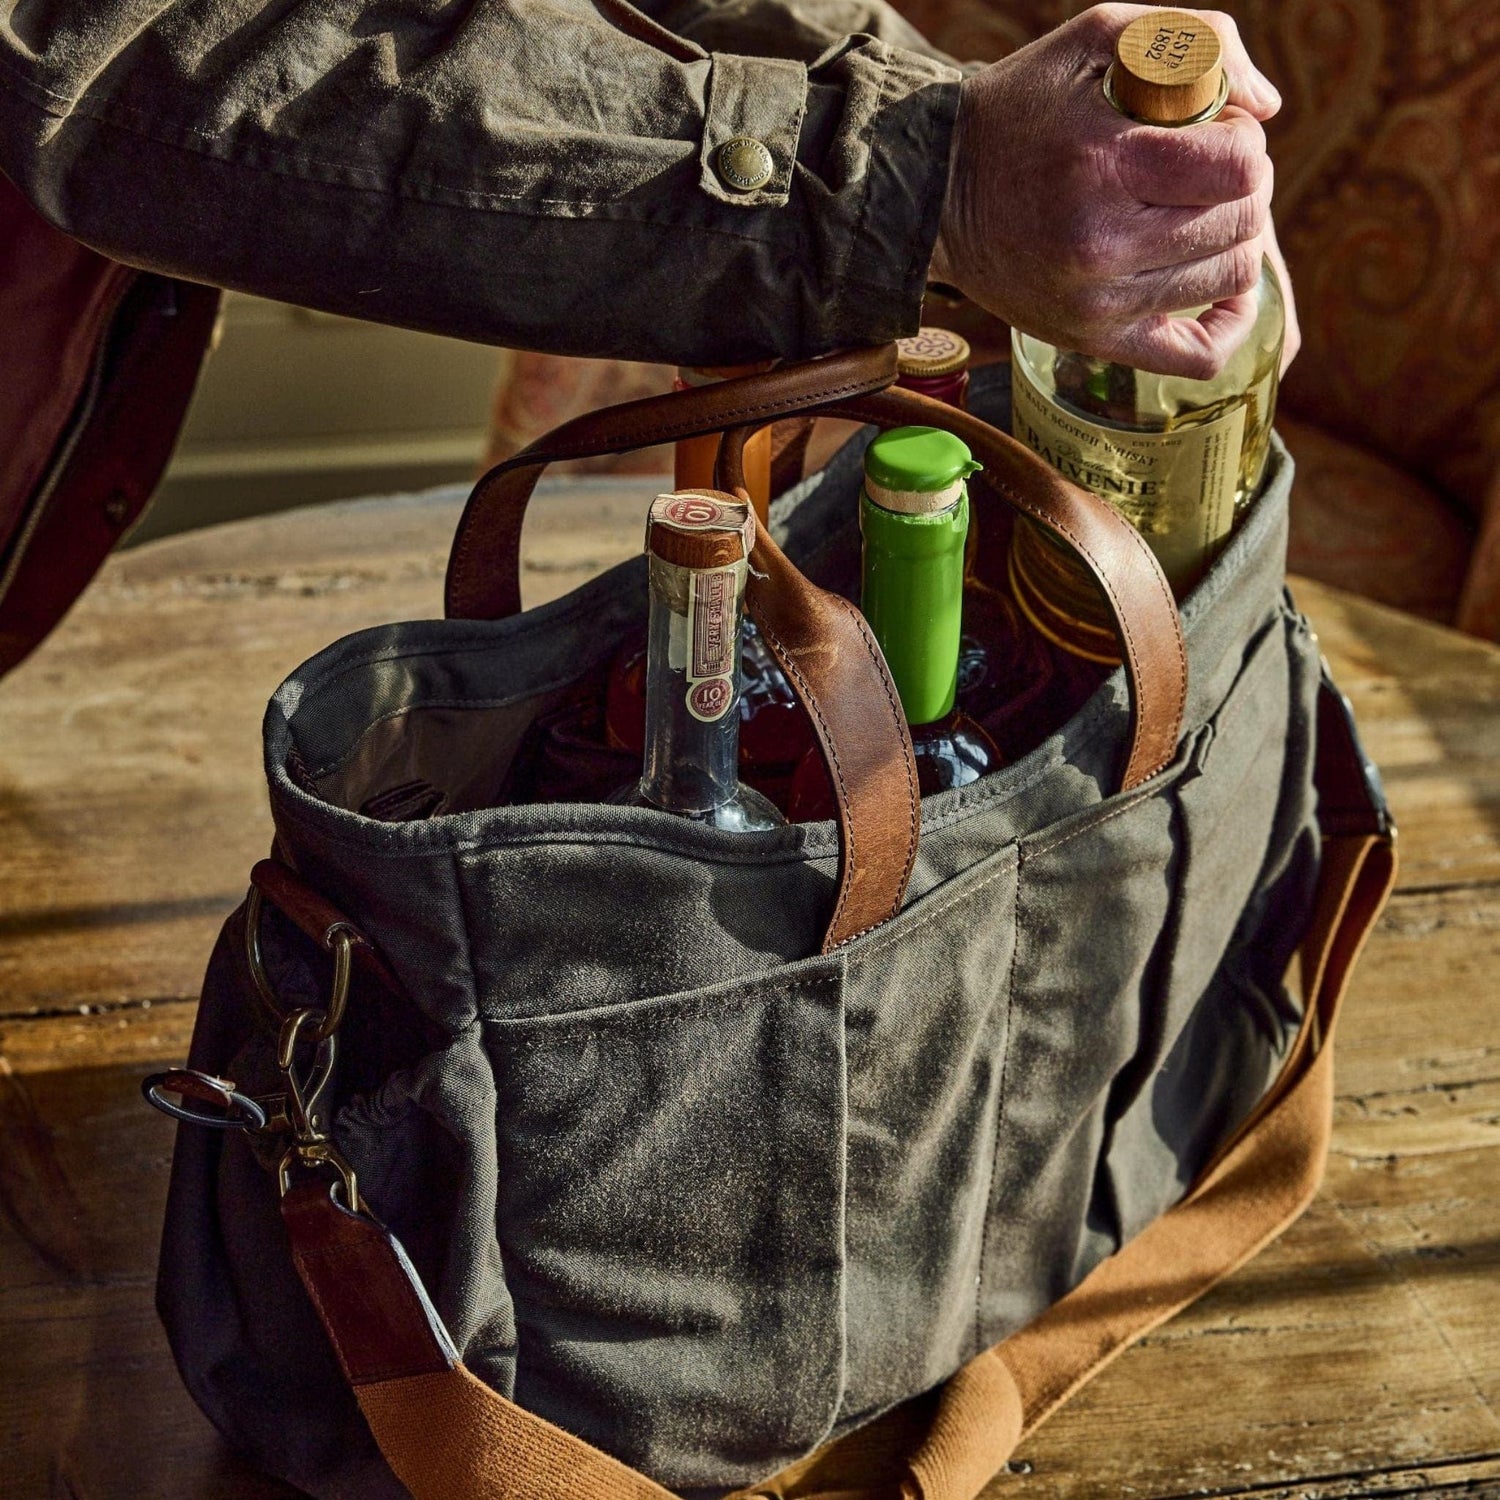 Whiskey Suede Tote